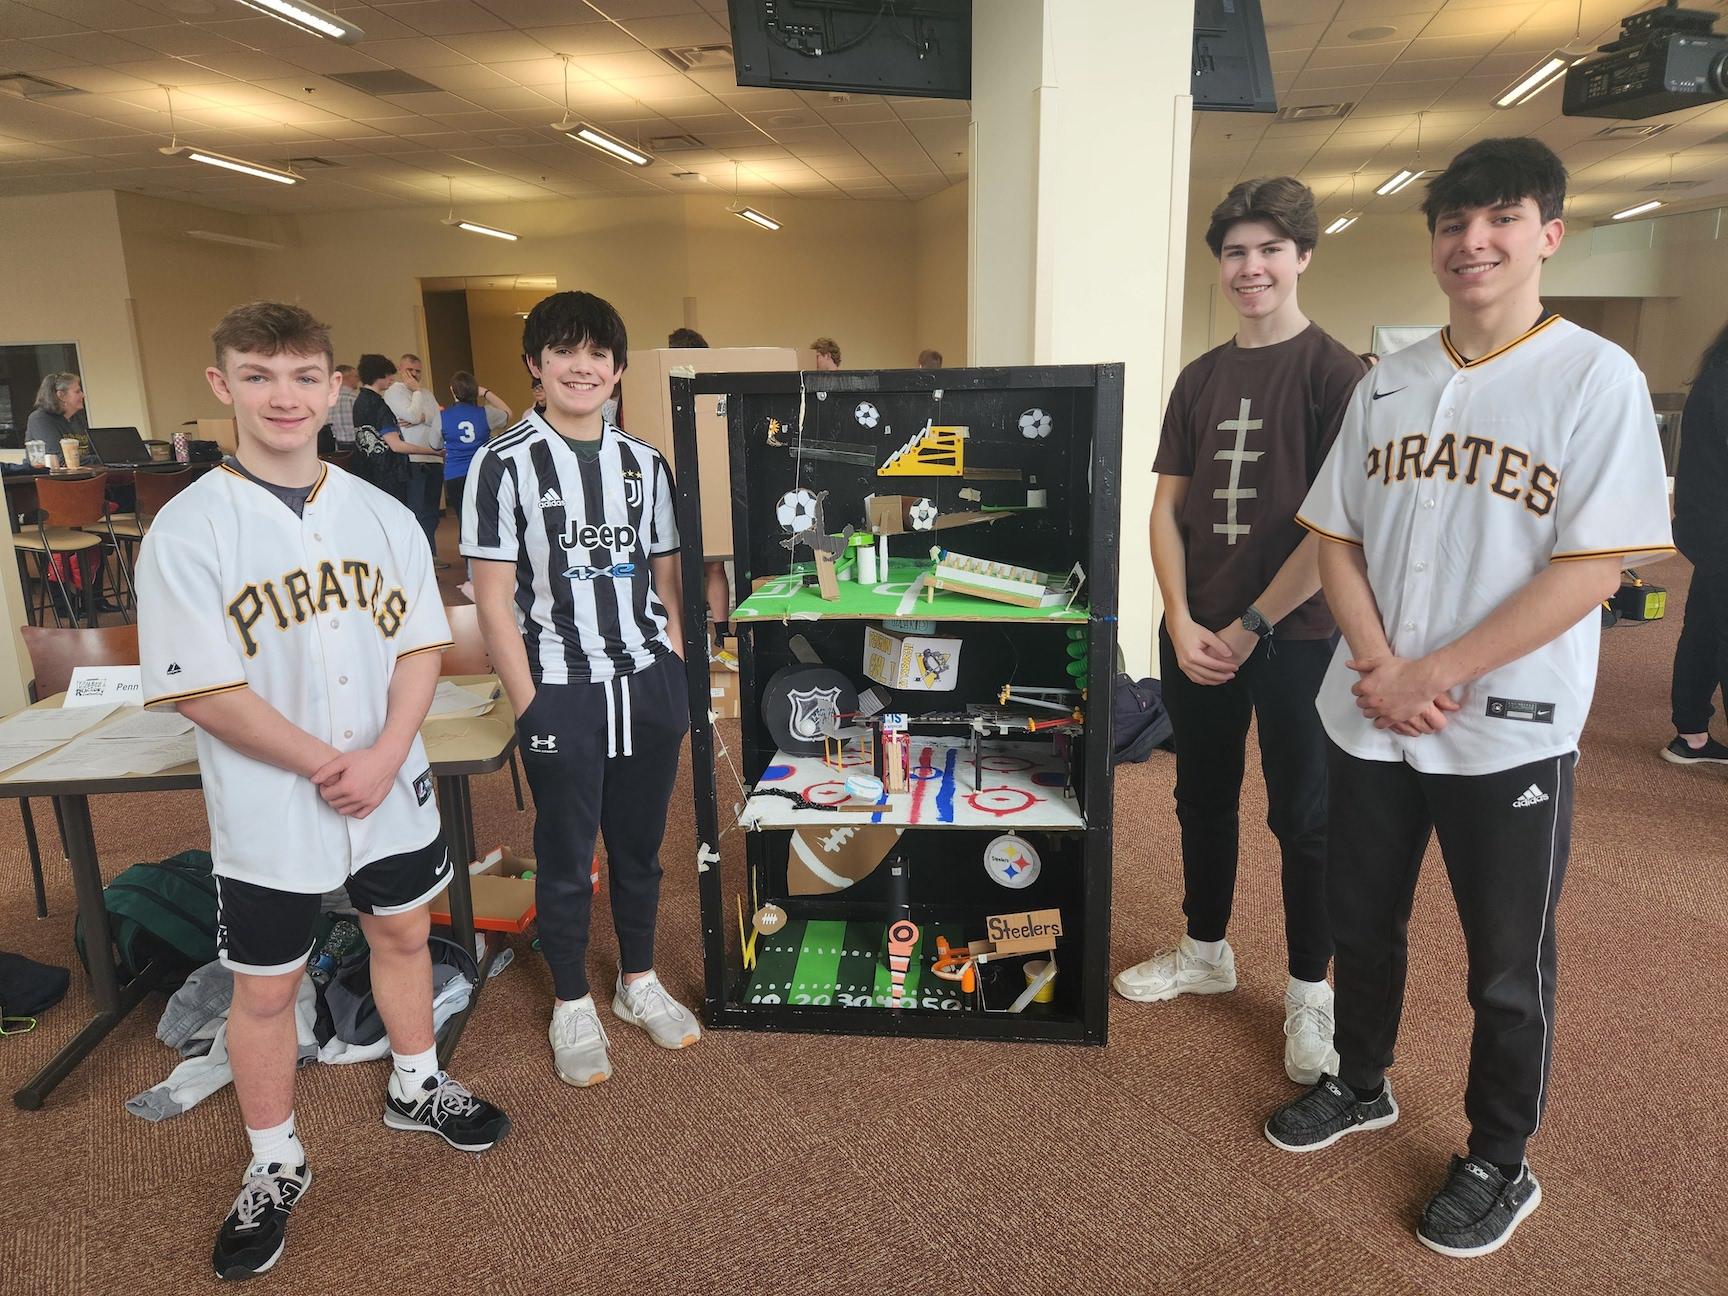 10th-graders Jacob Lang, Evan Sadler, Ethan Goldsworthy and Logan Matrisch with their Pittsburgh Sports machine